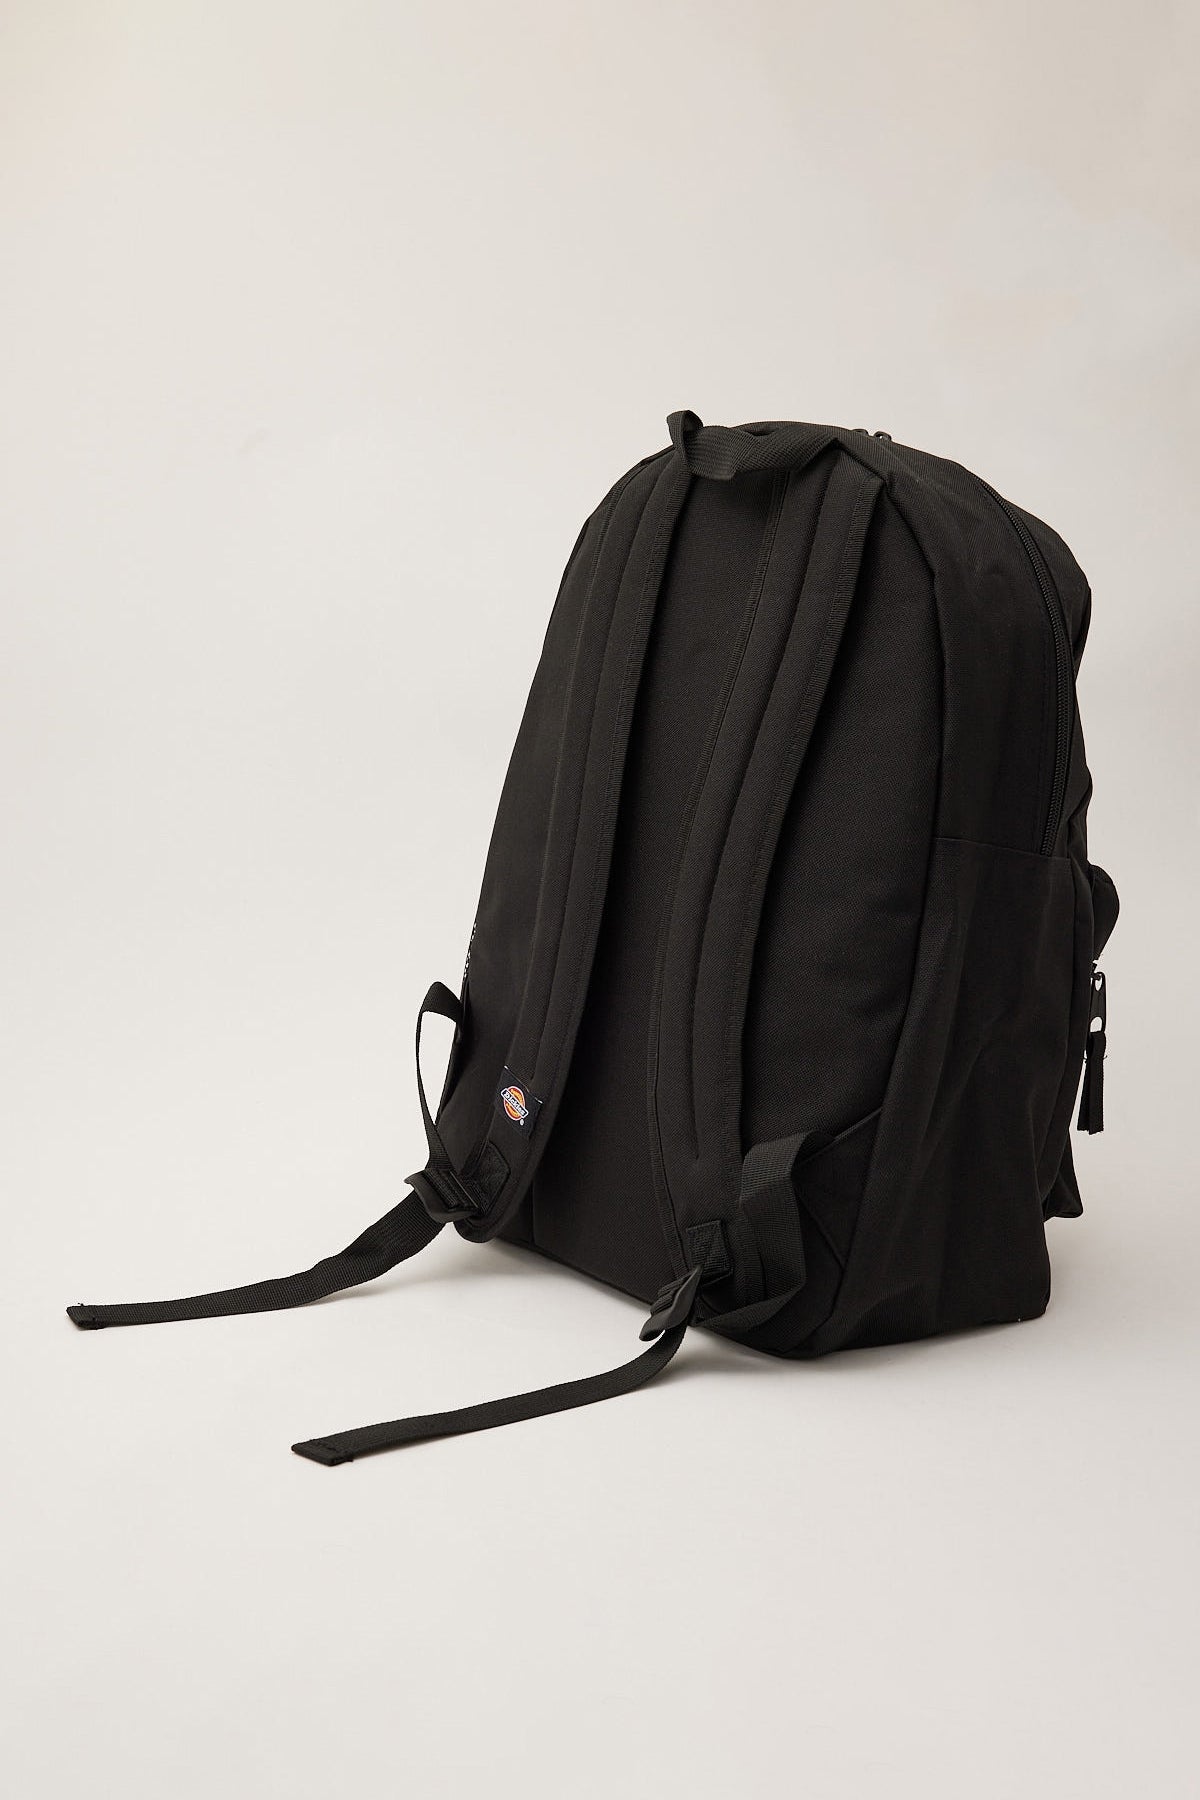 Dickies Stretton Student Backpack Black